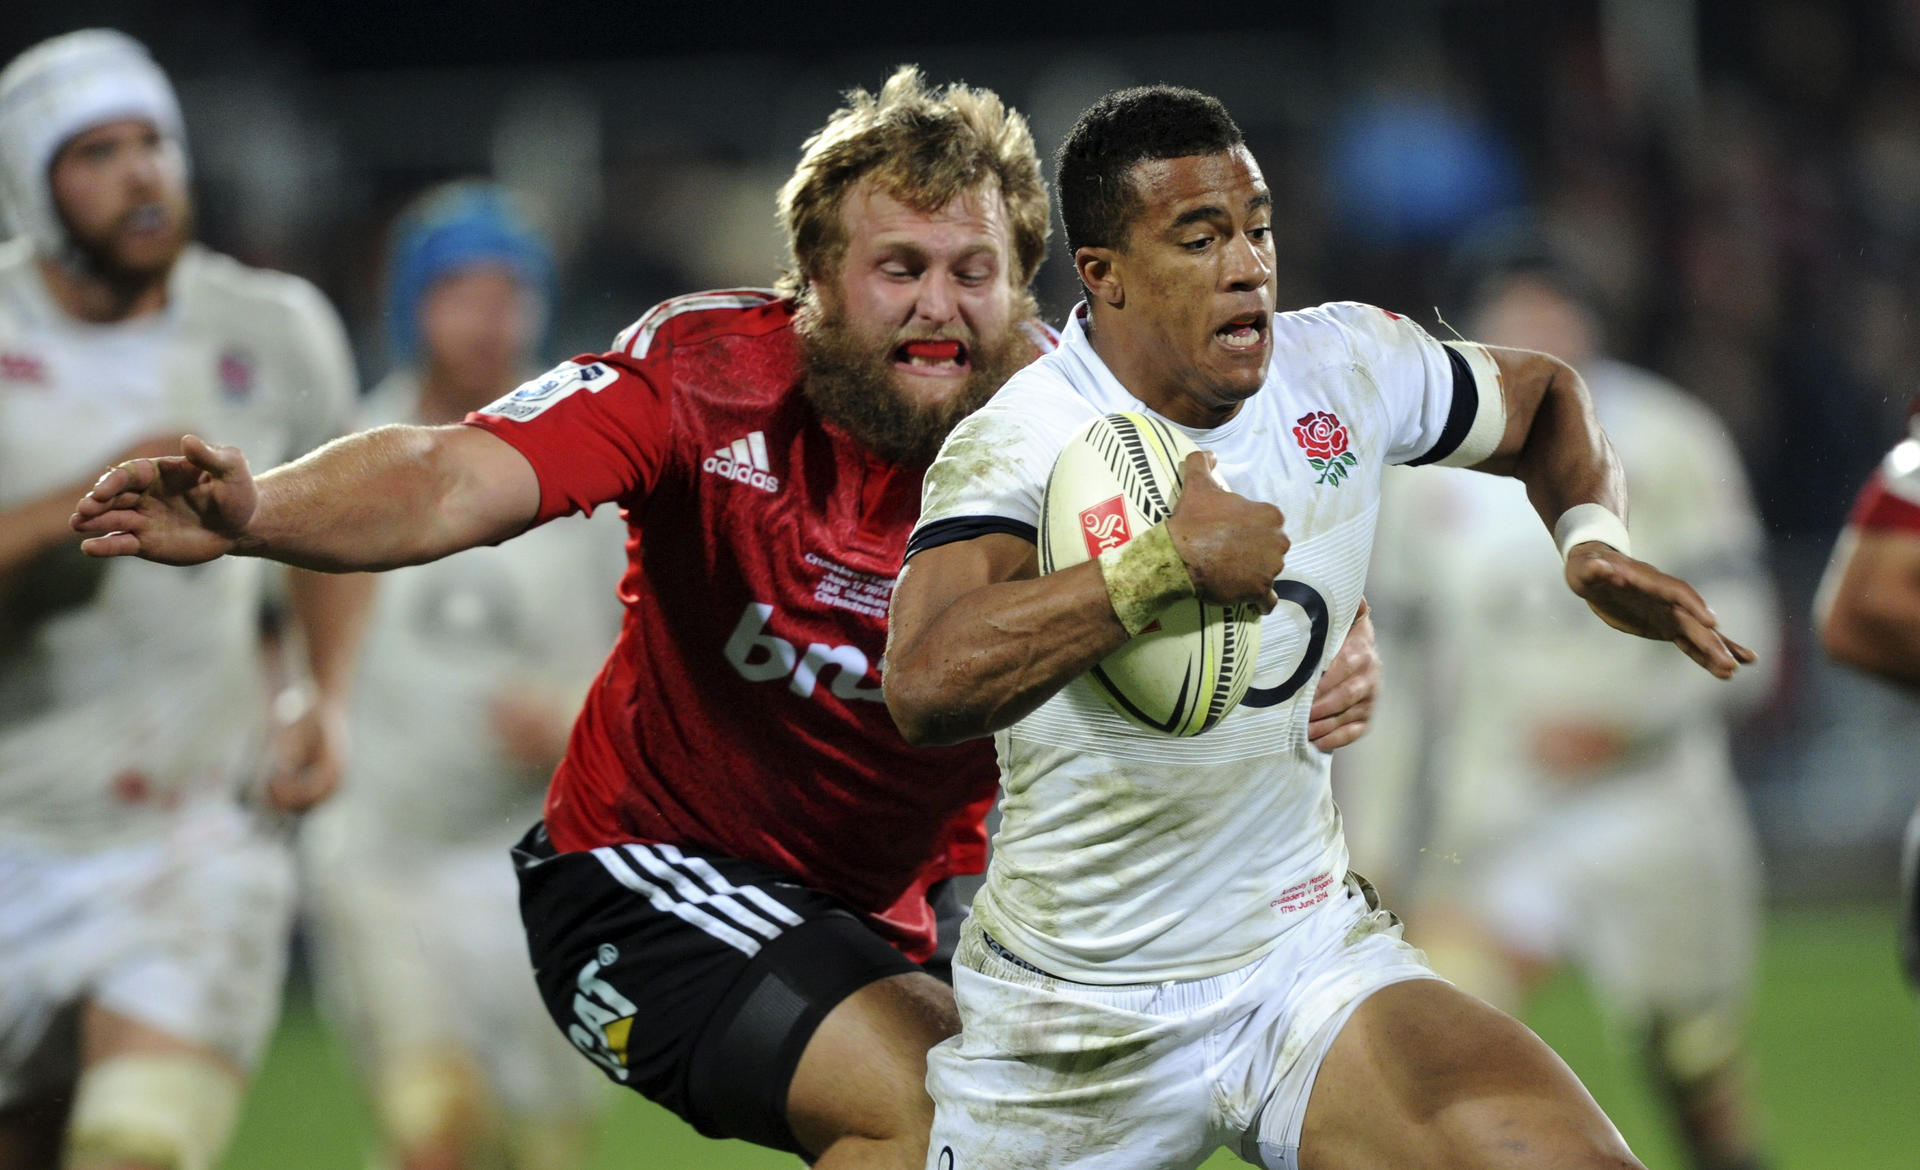 England's Anthony Watson outpaces Crusaders' Joe Moody in their match at Christchurch. Photo: AP